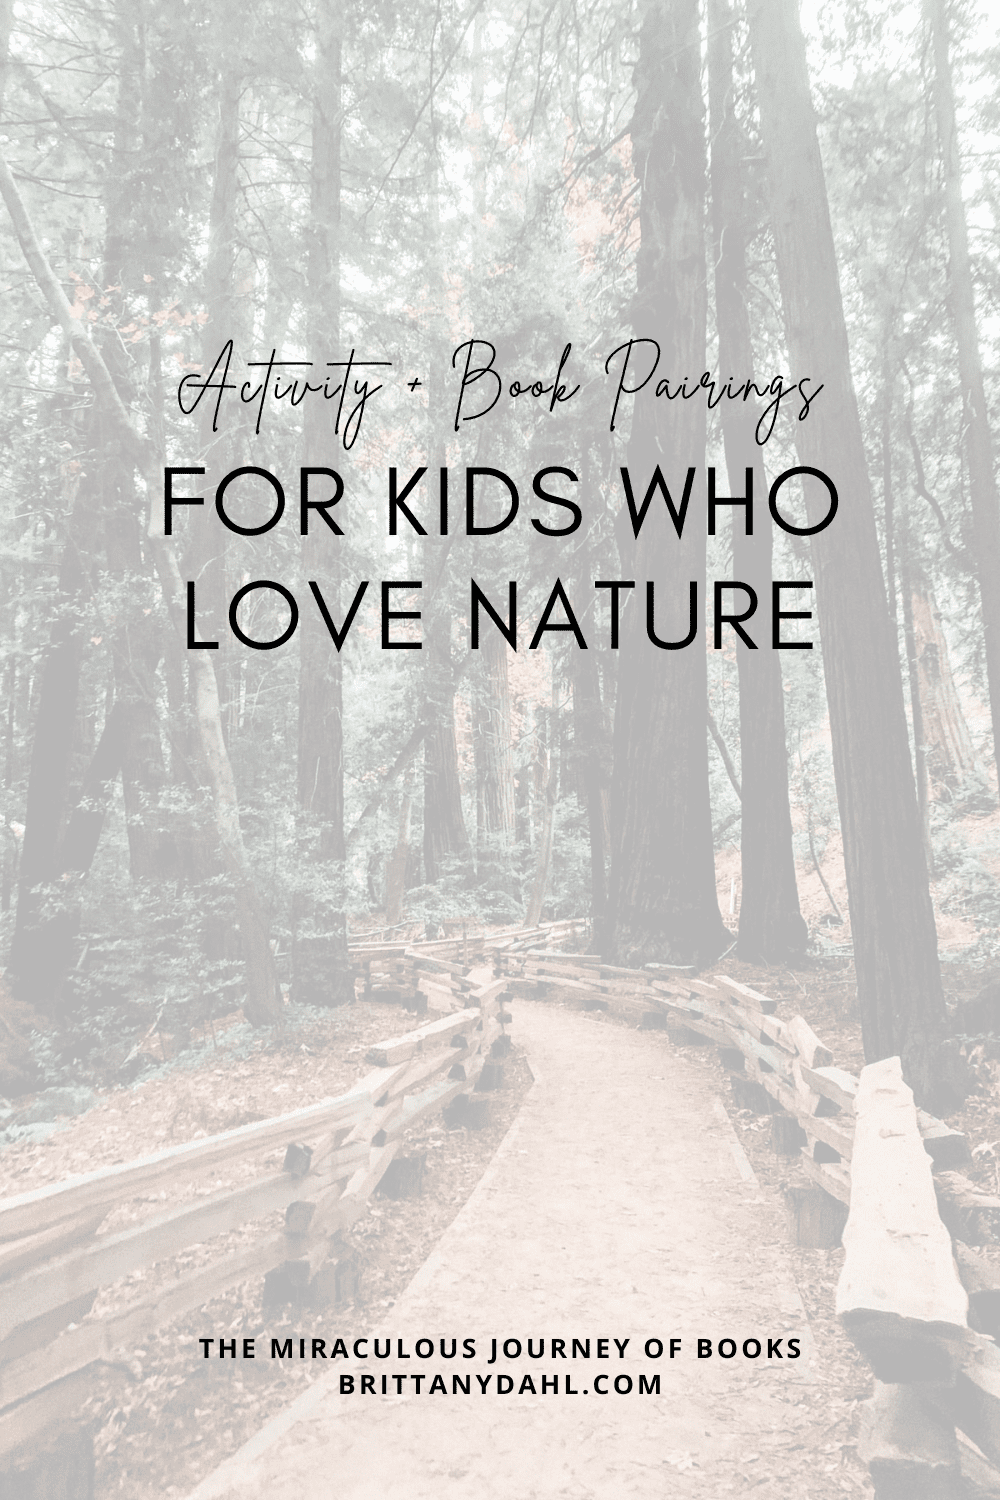 Activity and Book Pairings for kids who love nature from The Miraculous Journey of Books at BrittanyDahl.com. Image of path going through a wooded area.